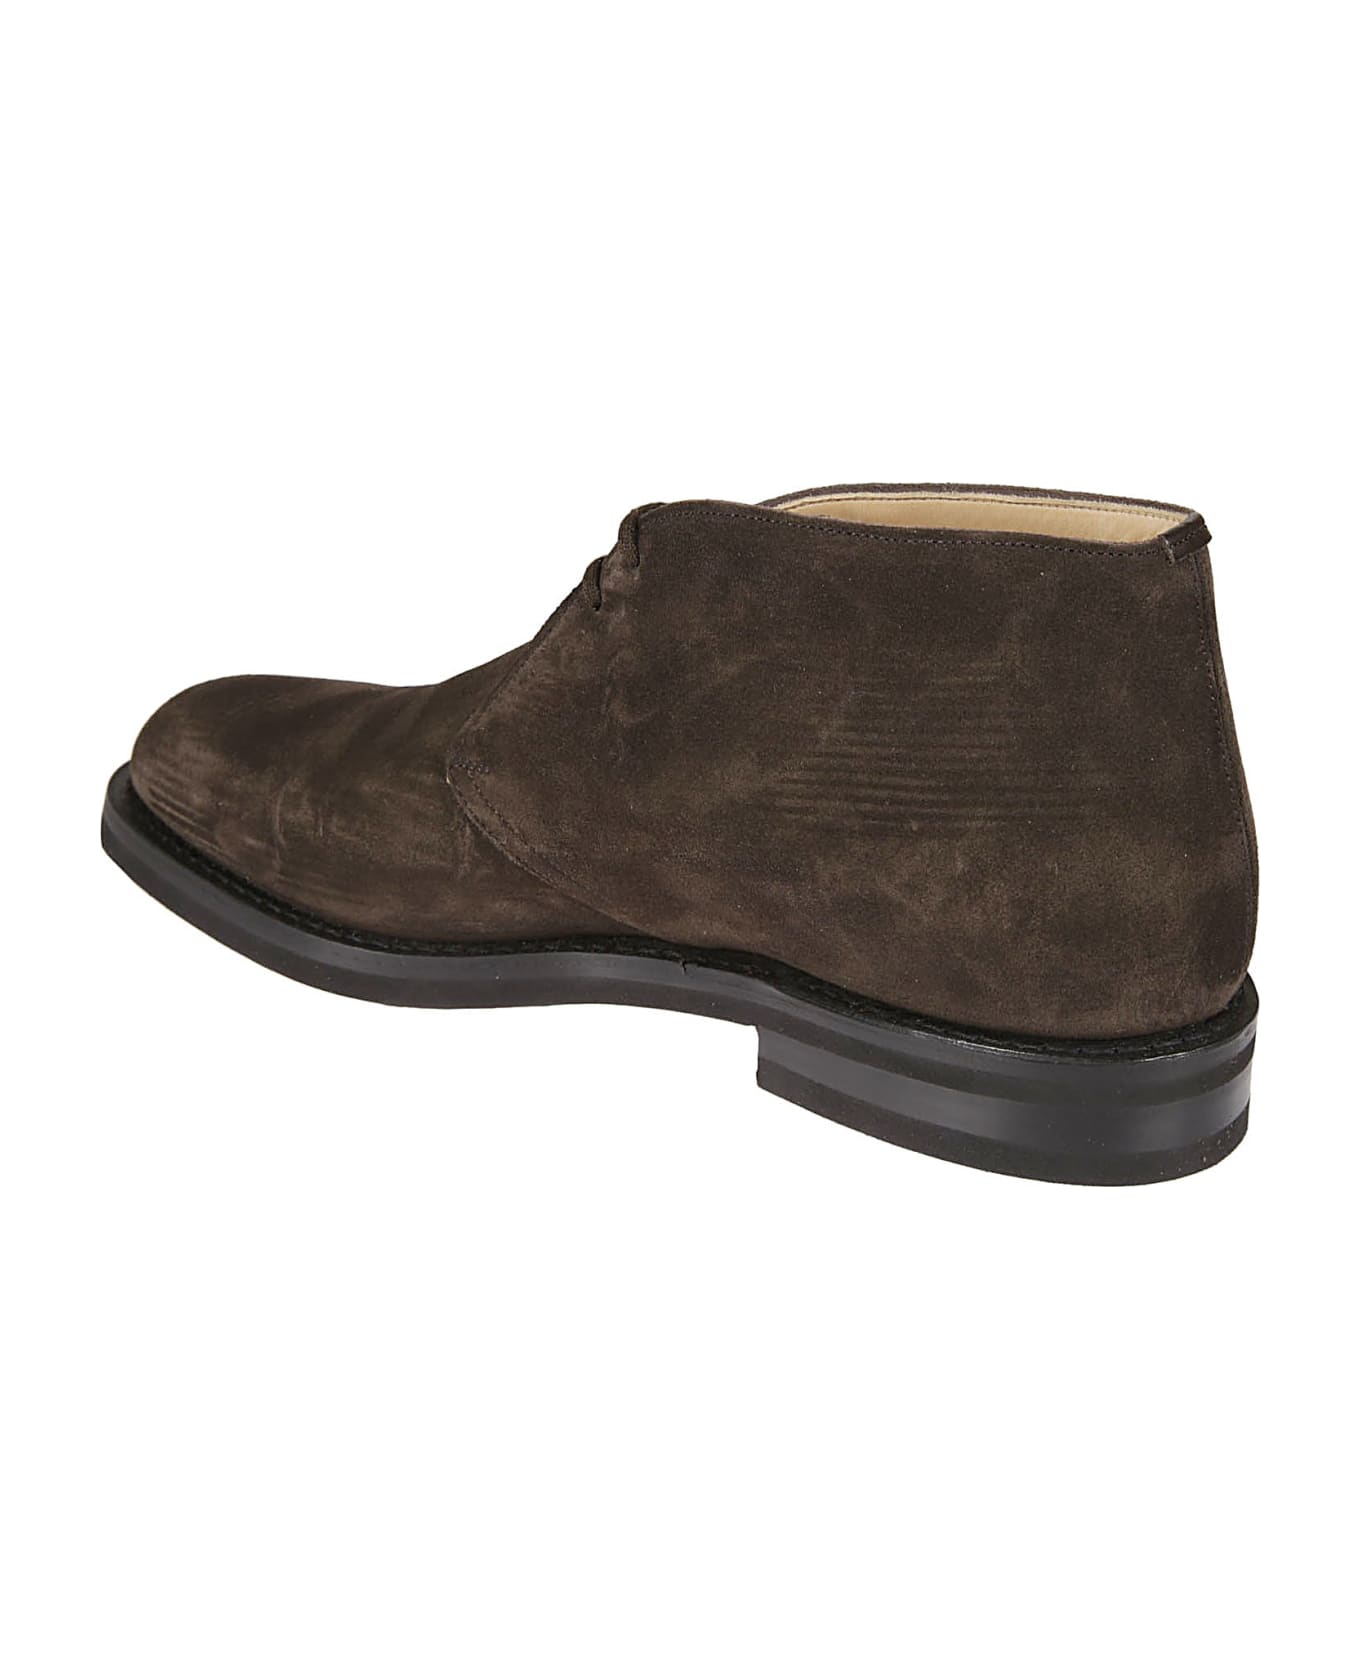 Church's Ryder Boots - Aad Brown